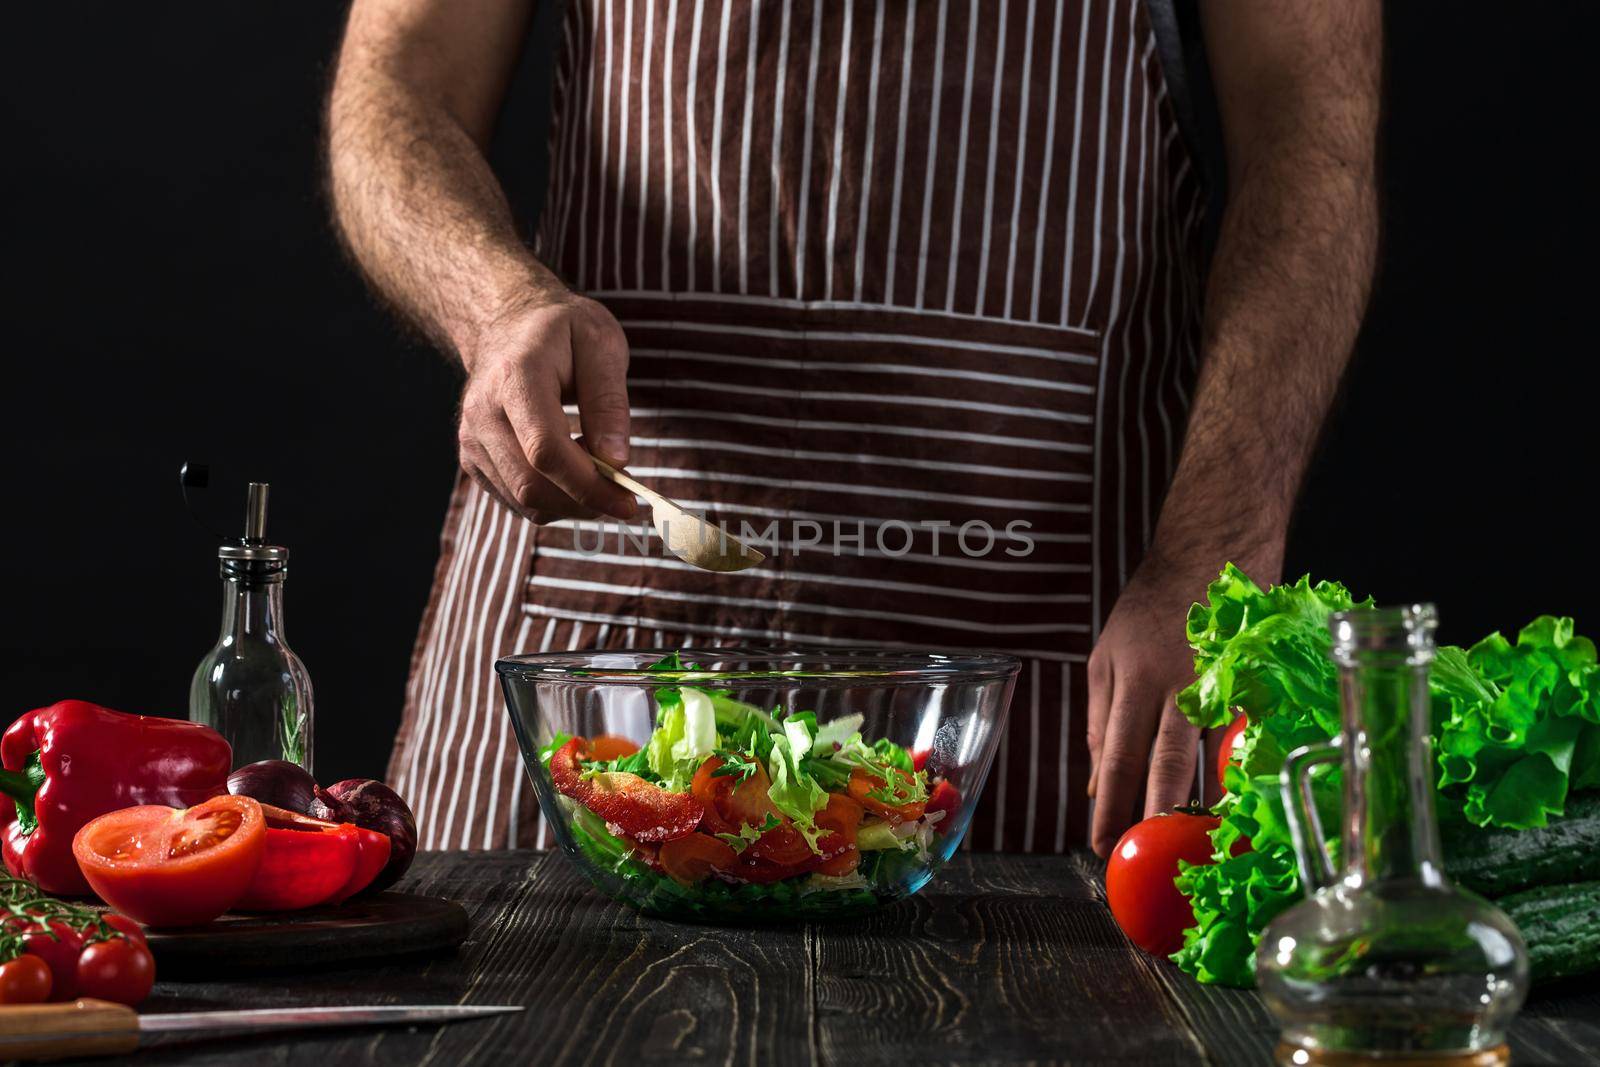 Man preparing salad with fresh vegetables on a wooden table. Cooking tasty and healthy food. On black background. Vegetarian food, healthy or cooking concept.